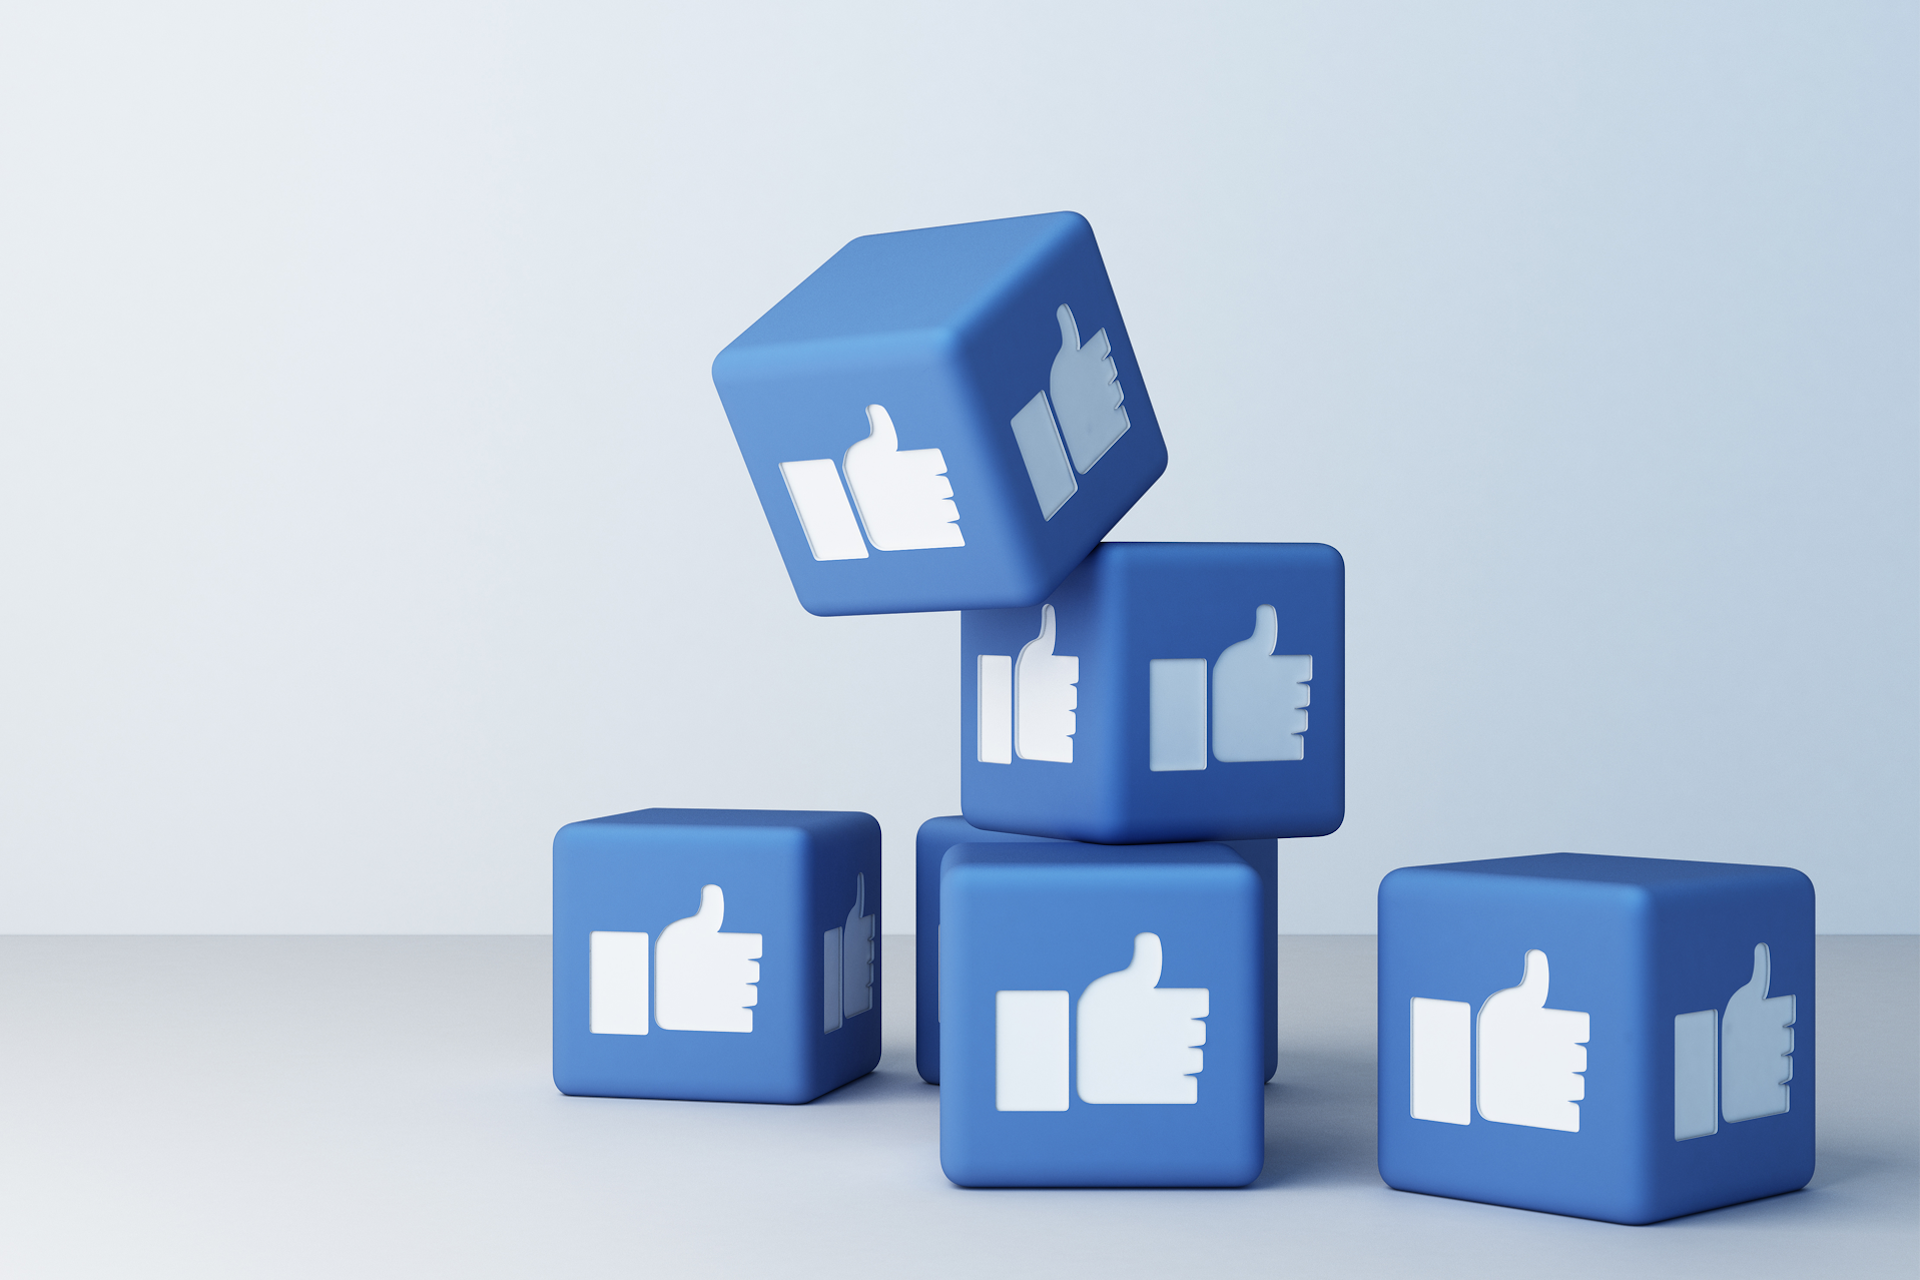 Blue cubes with the Facebook like button on the sides. 